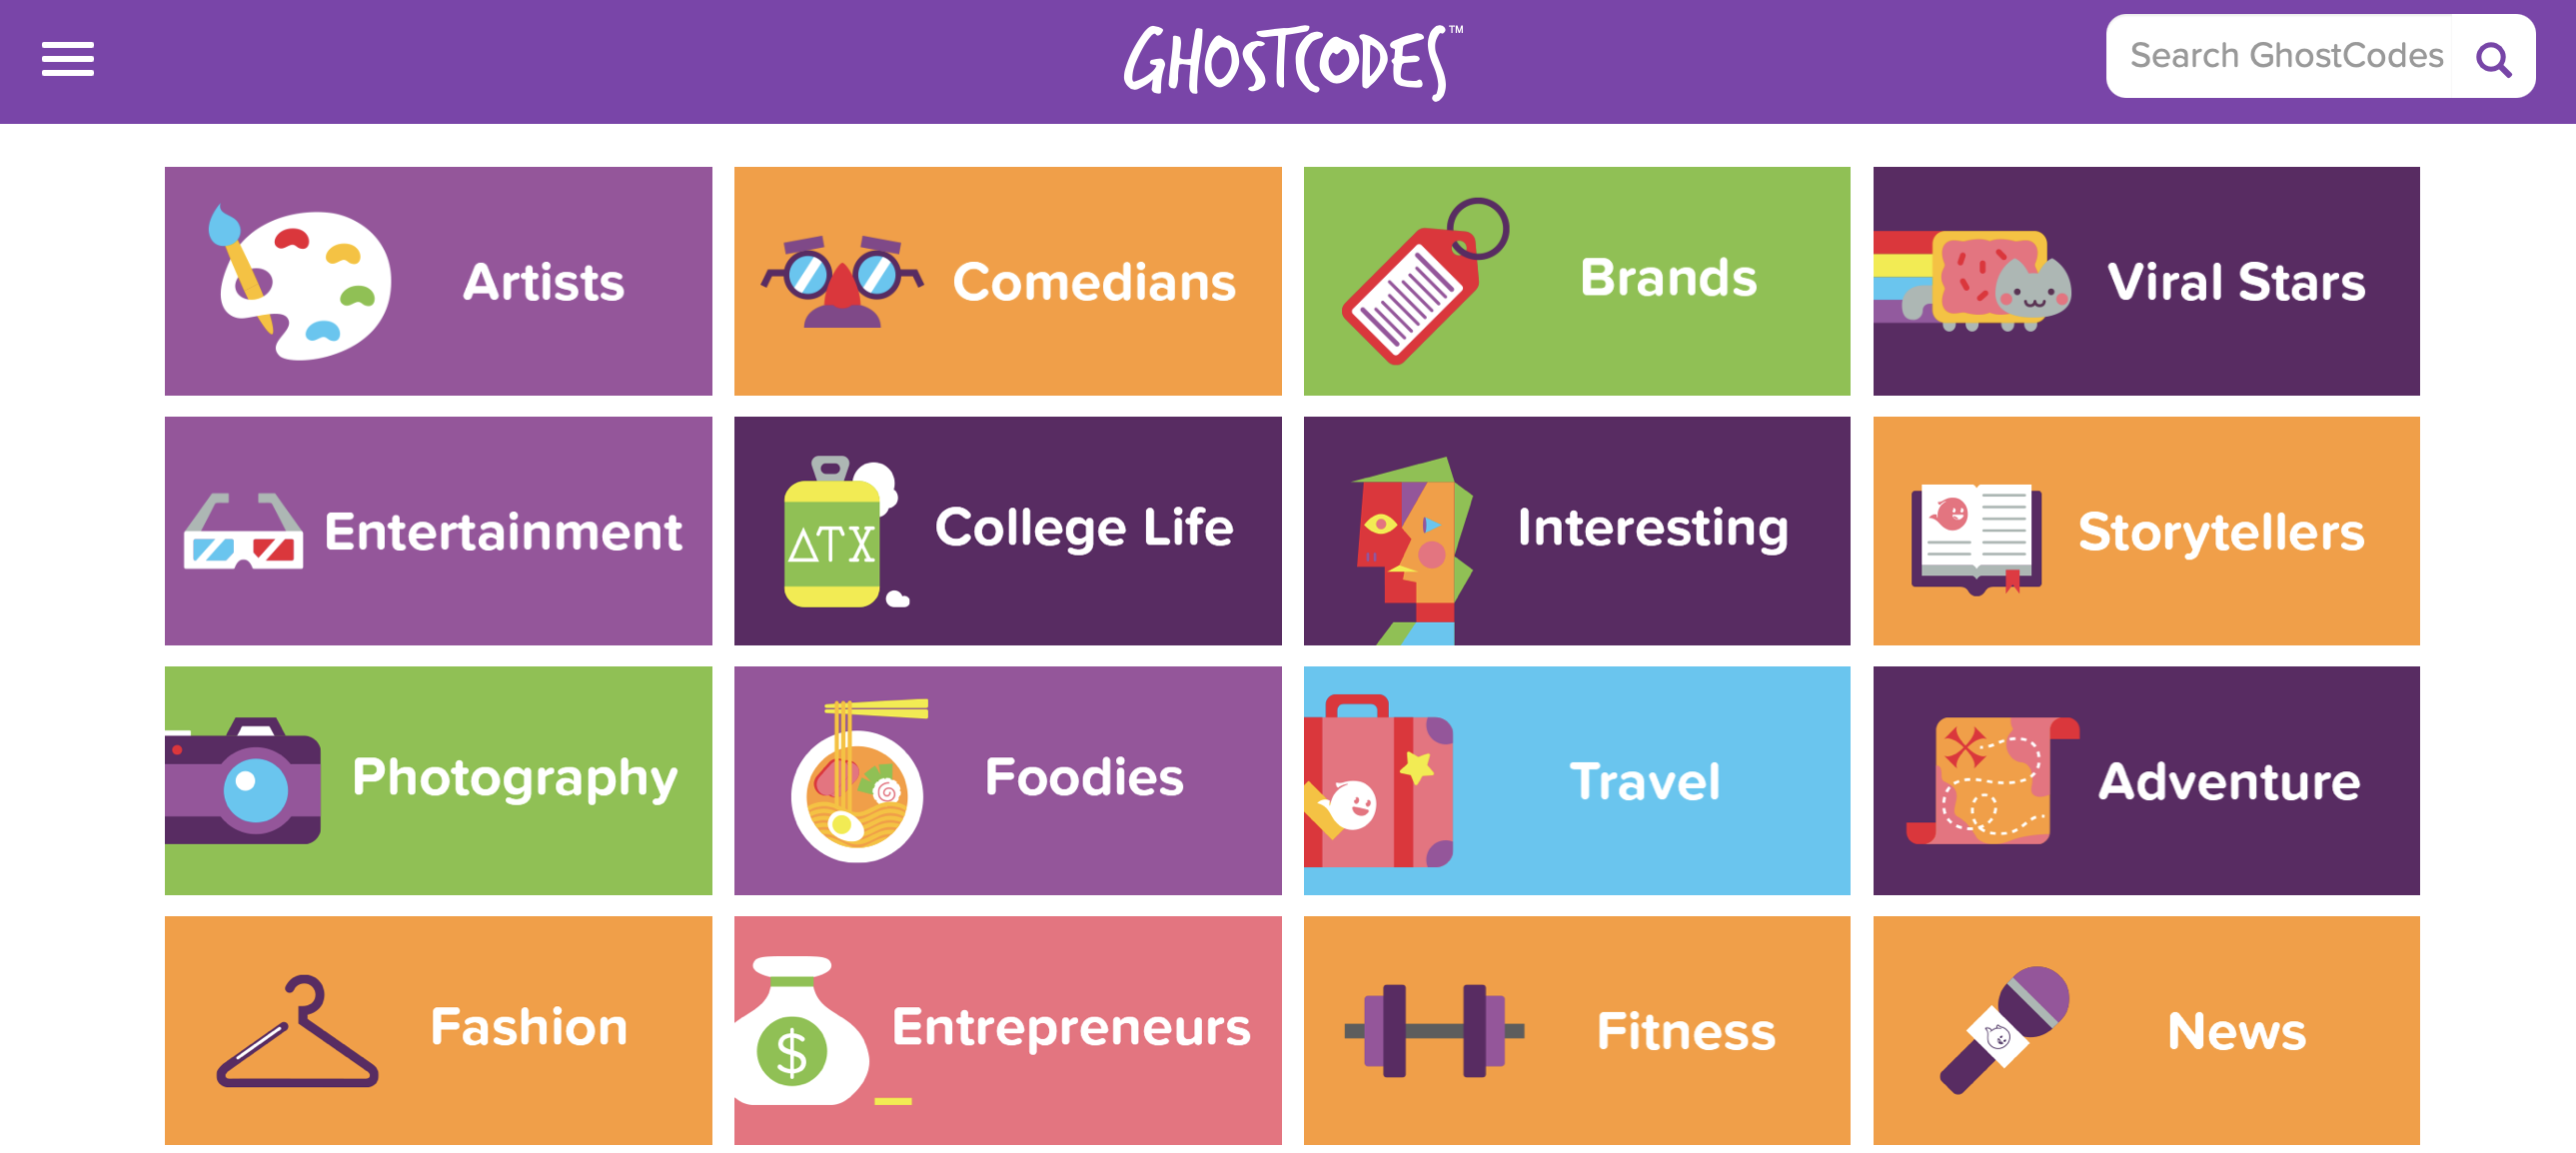 Find snapchat influencers on Ghostcodes